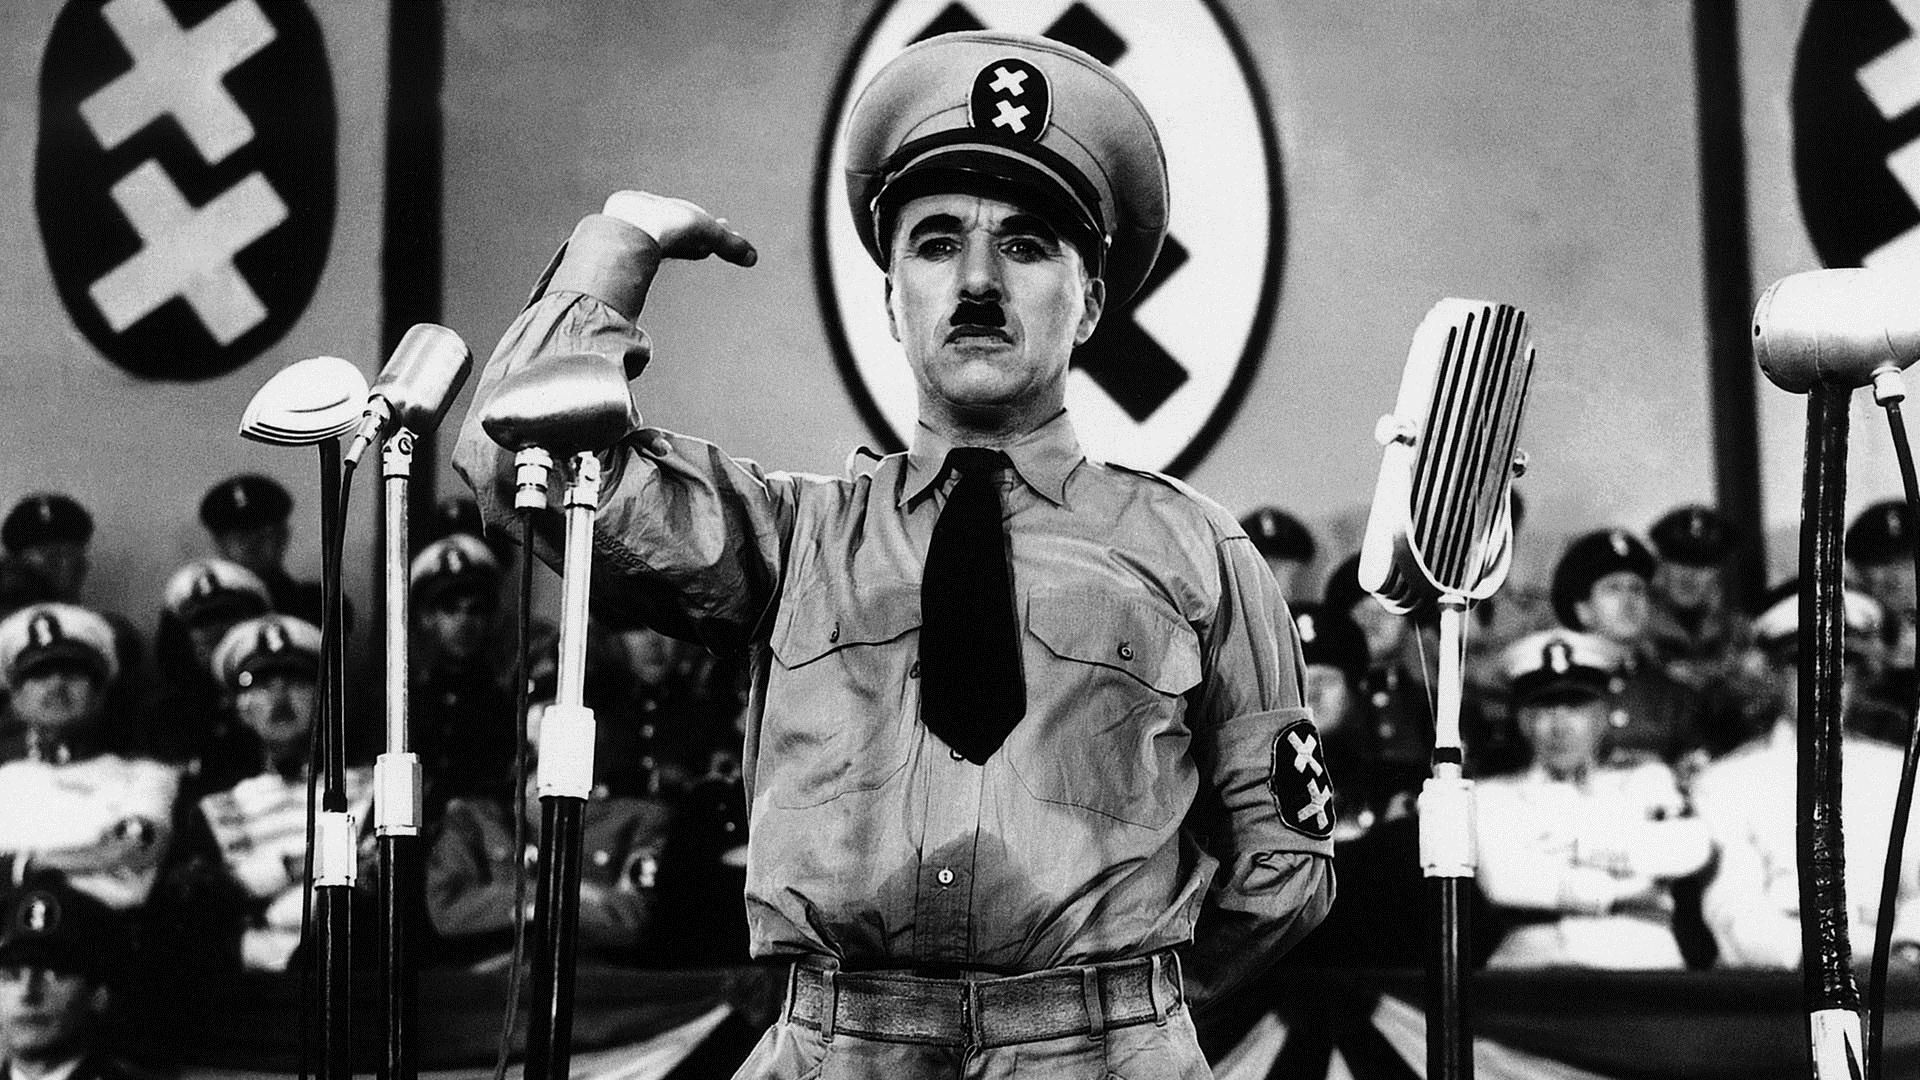 The Great Dictator background